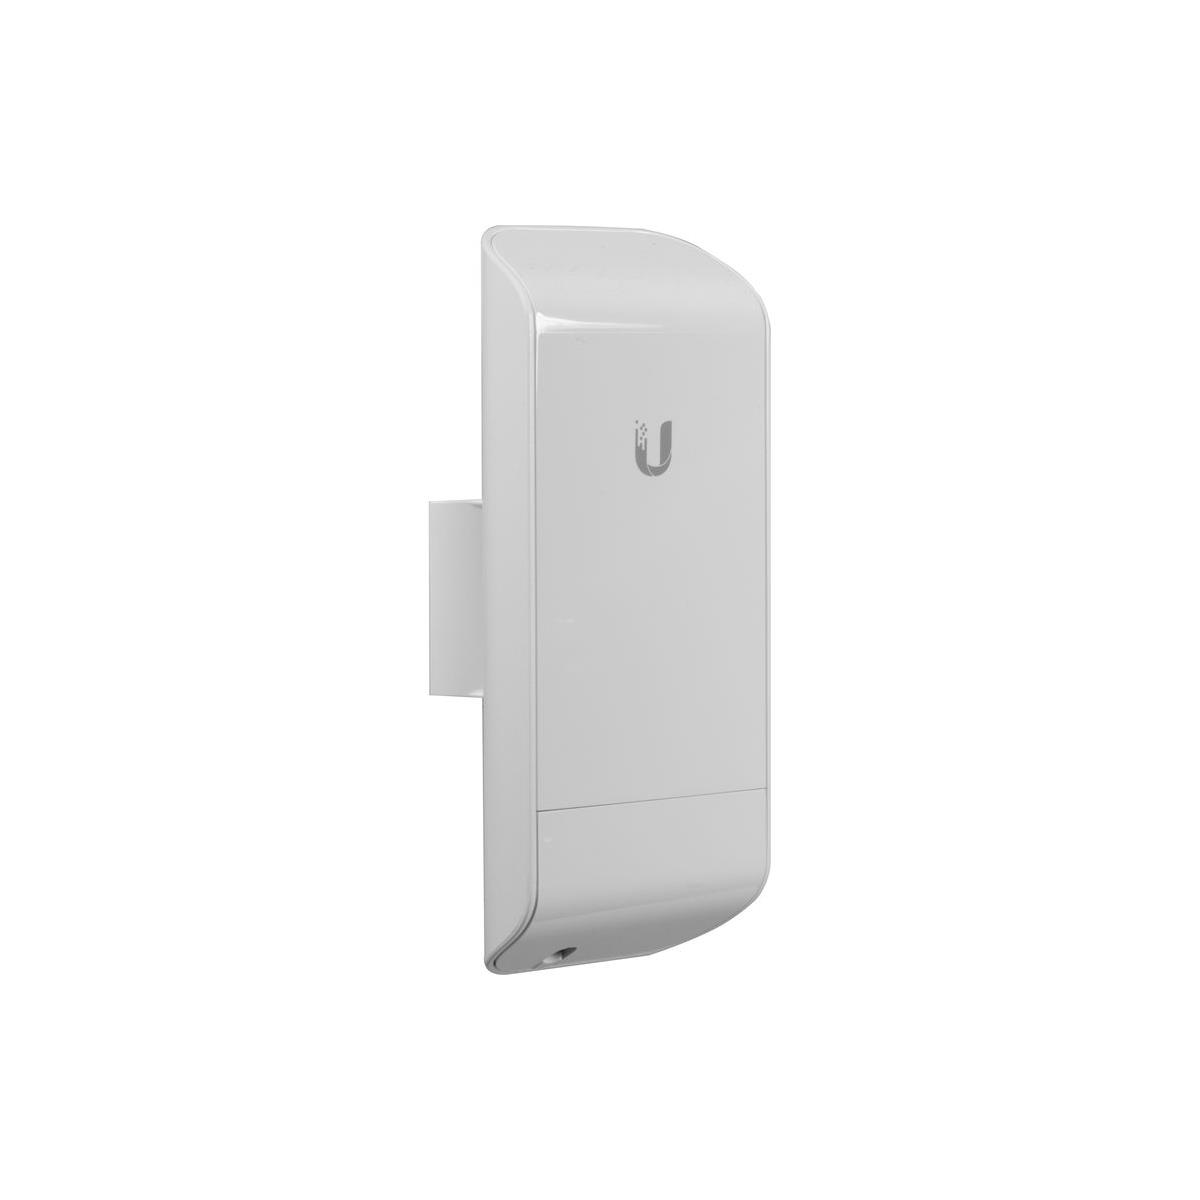 Image of Ubiquiti Networks NanoStationlocoM5 5GHz Outdoor Wireless CPE Router